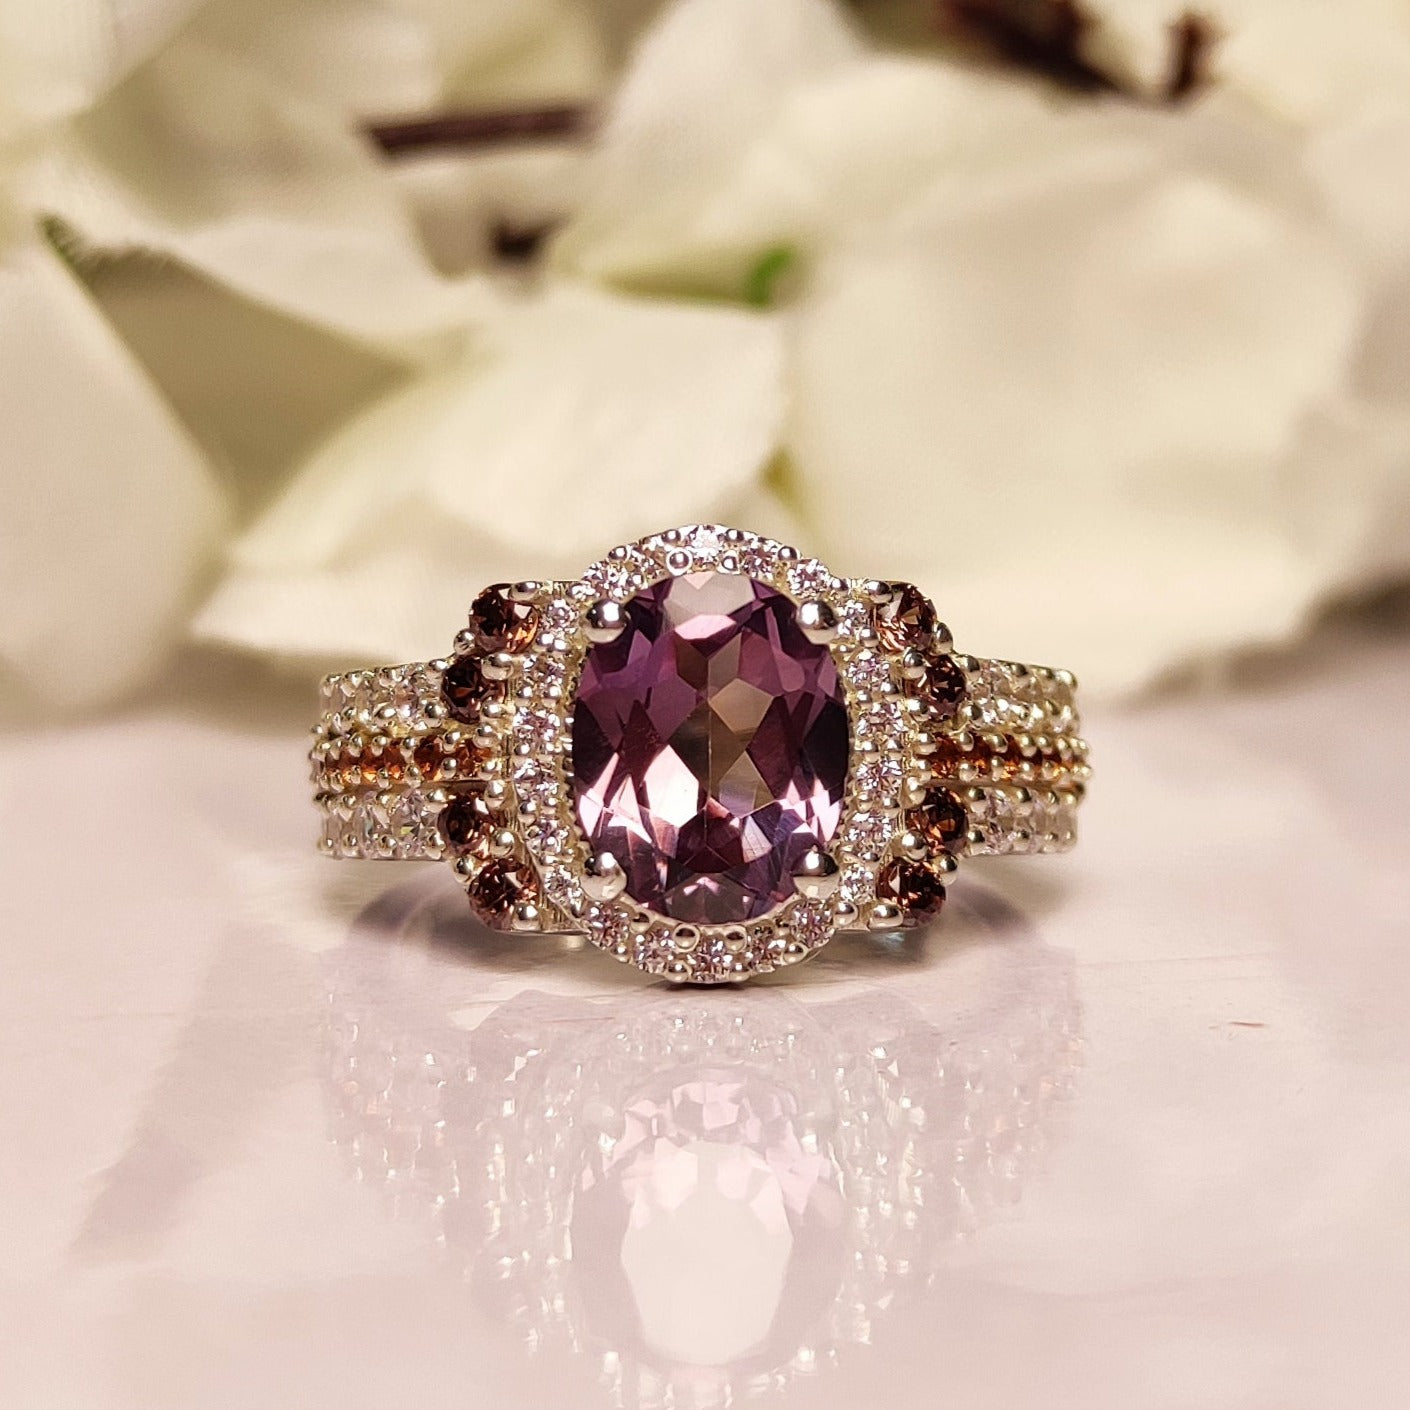 Amethyst and Brown Diamond Engagement Ring - Silver Bridal Halo Setting